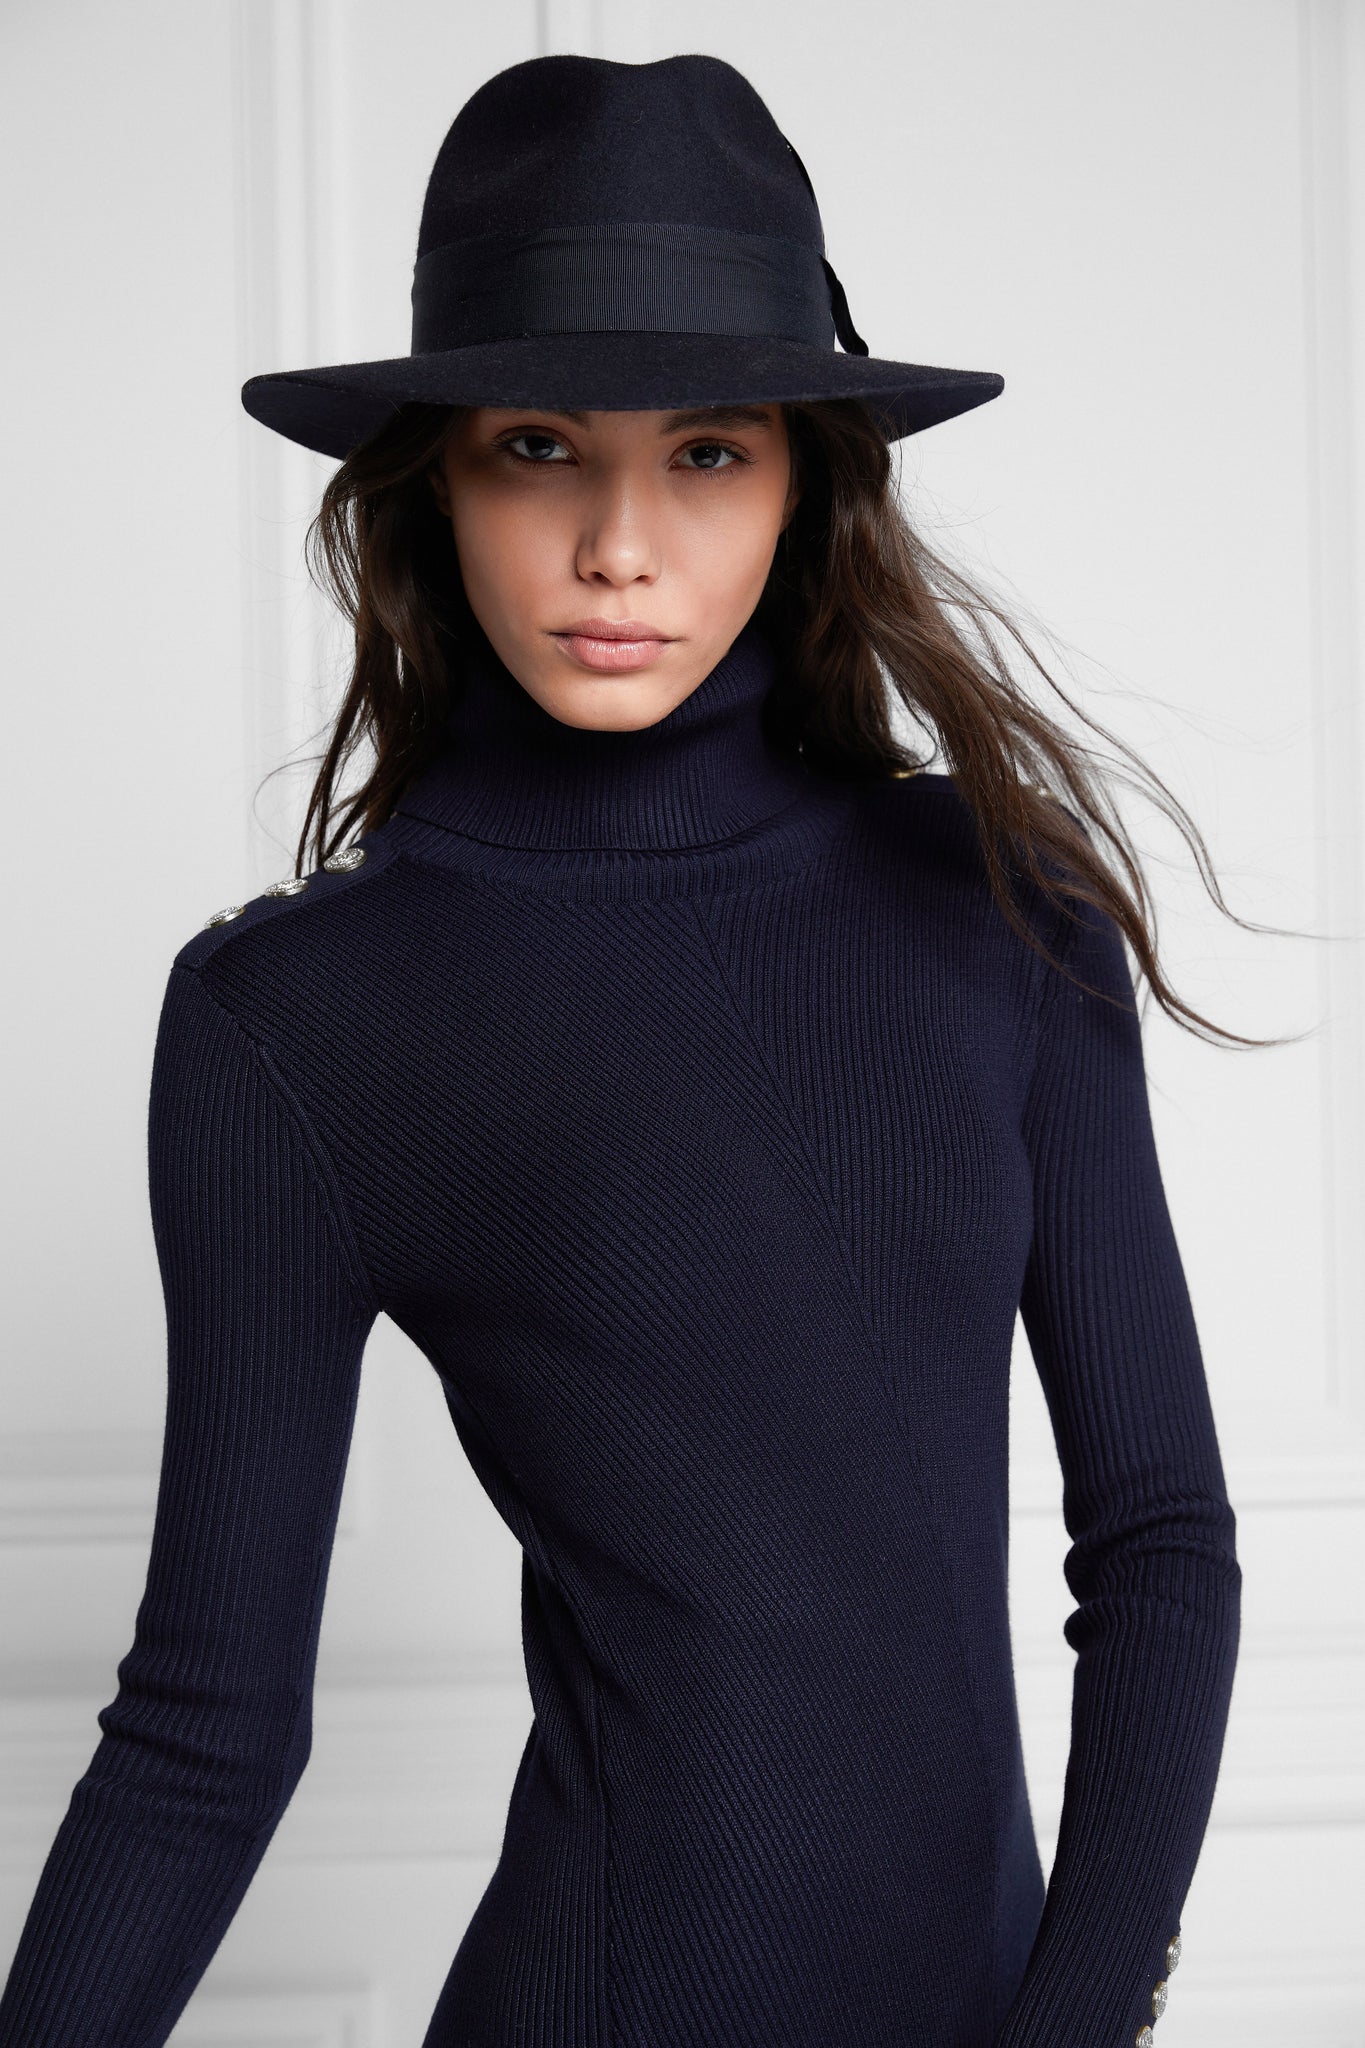 womens body-contouring navy knitted midi dress with ribbed roll neck and cuffs and gold buttons on shoulders and cuffs with navy fedora